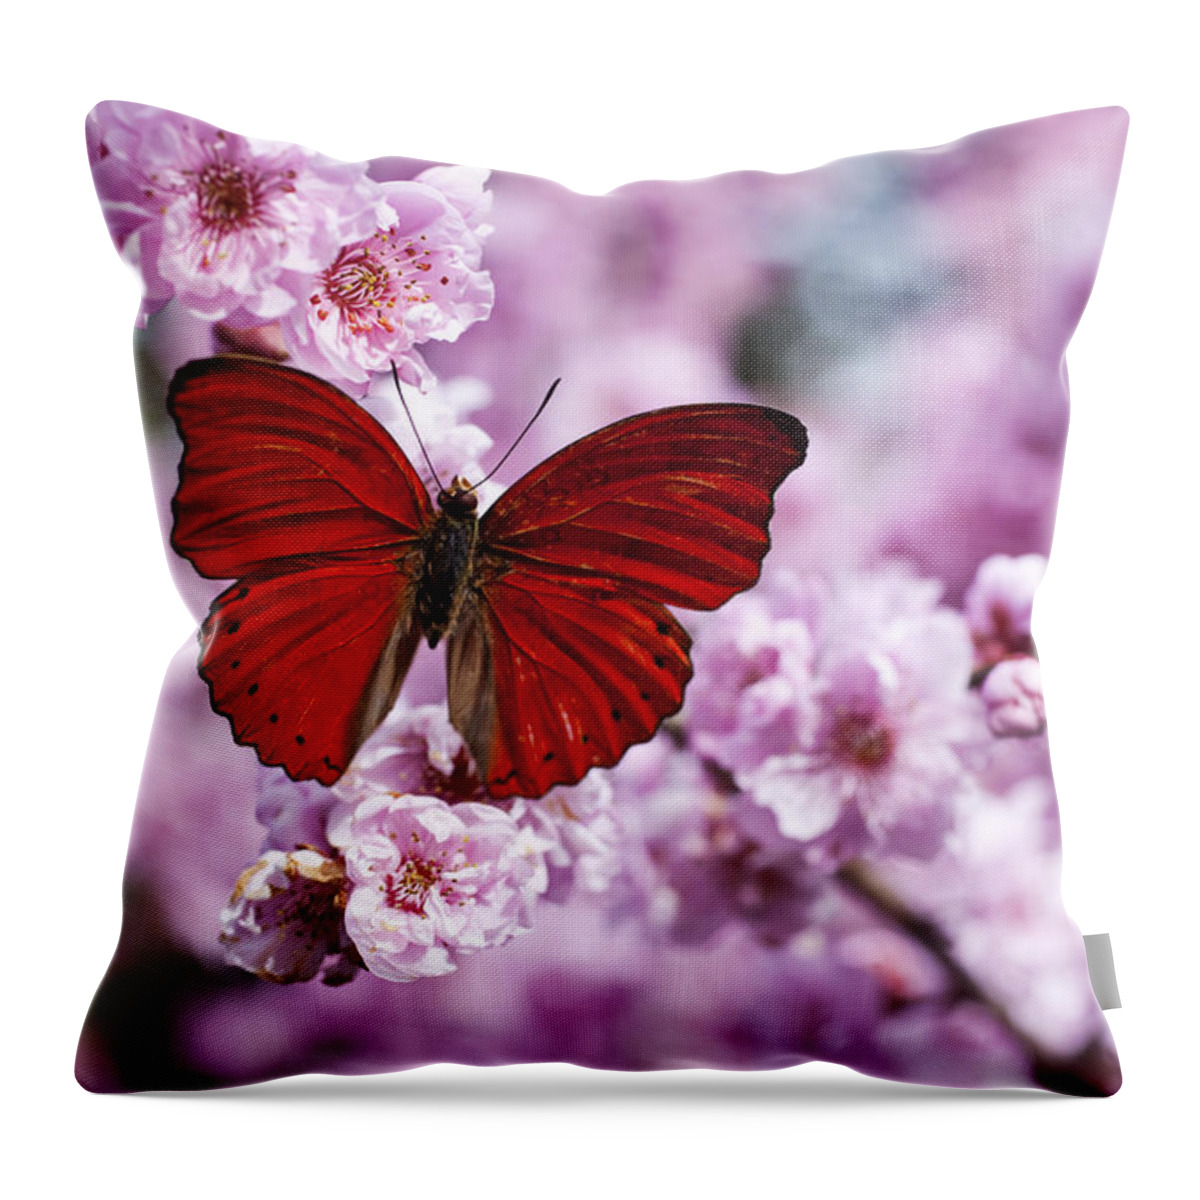 Red Throw Pillow featuring the photograph Red butterfly on plum blossom branch by Garry Gay